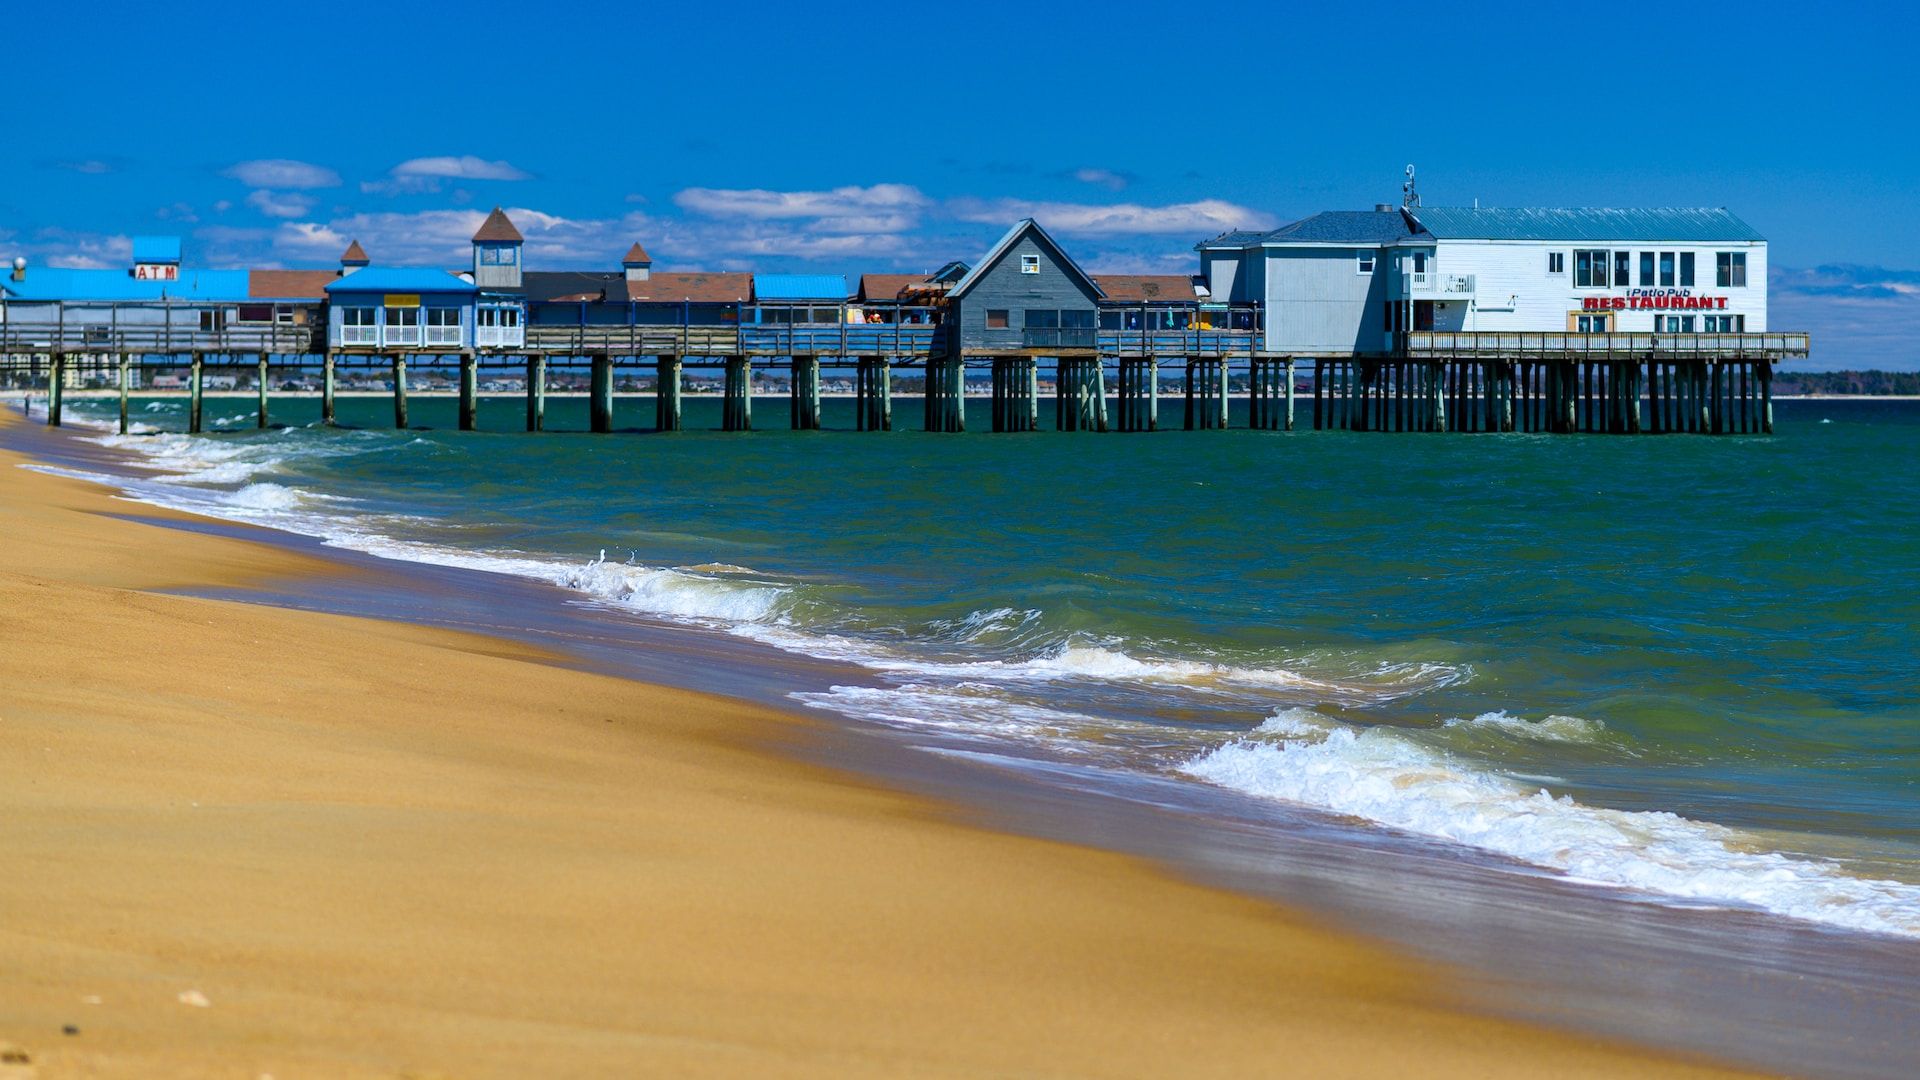  Old Orchard Beach, ME, USA